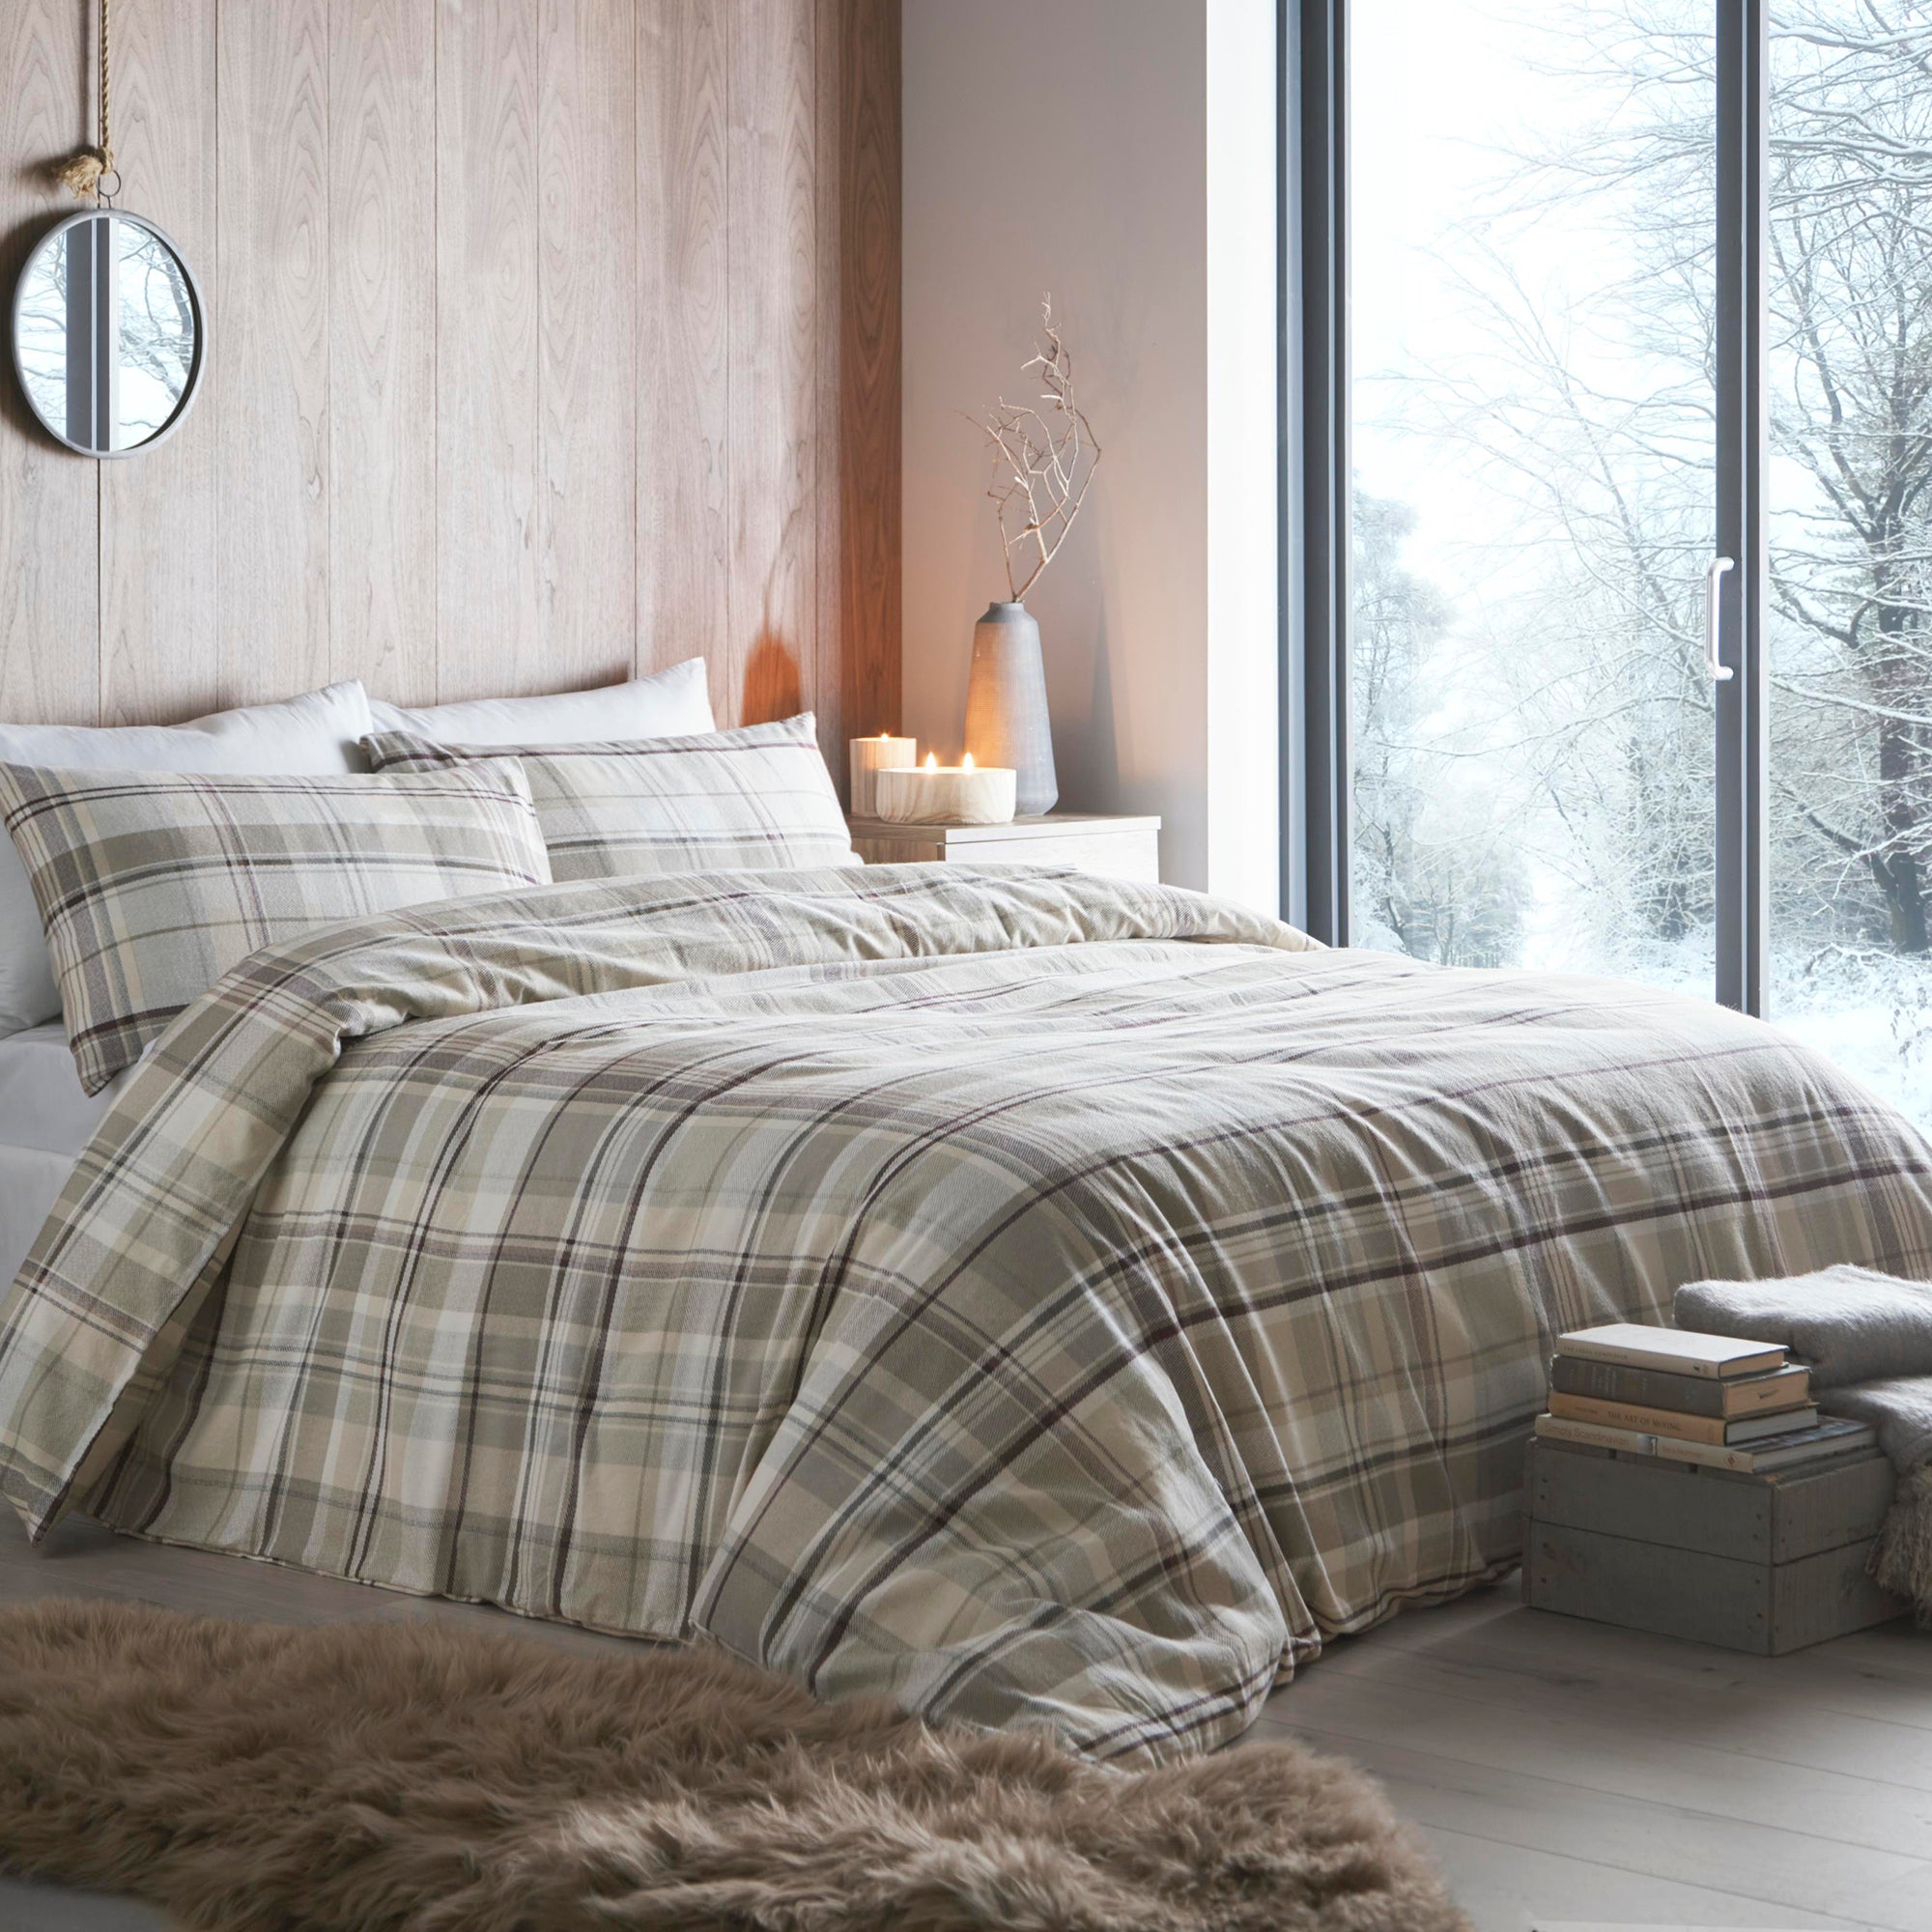 Applecross Check - 100% Cotton Duvet Cover Set in Natural - by Appletree Hygge